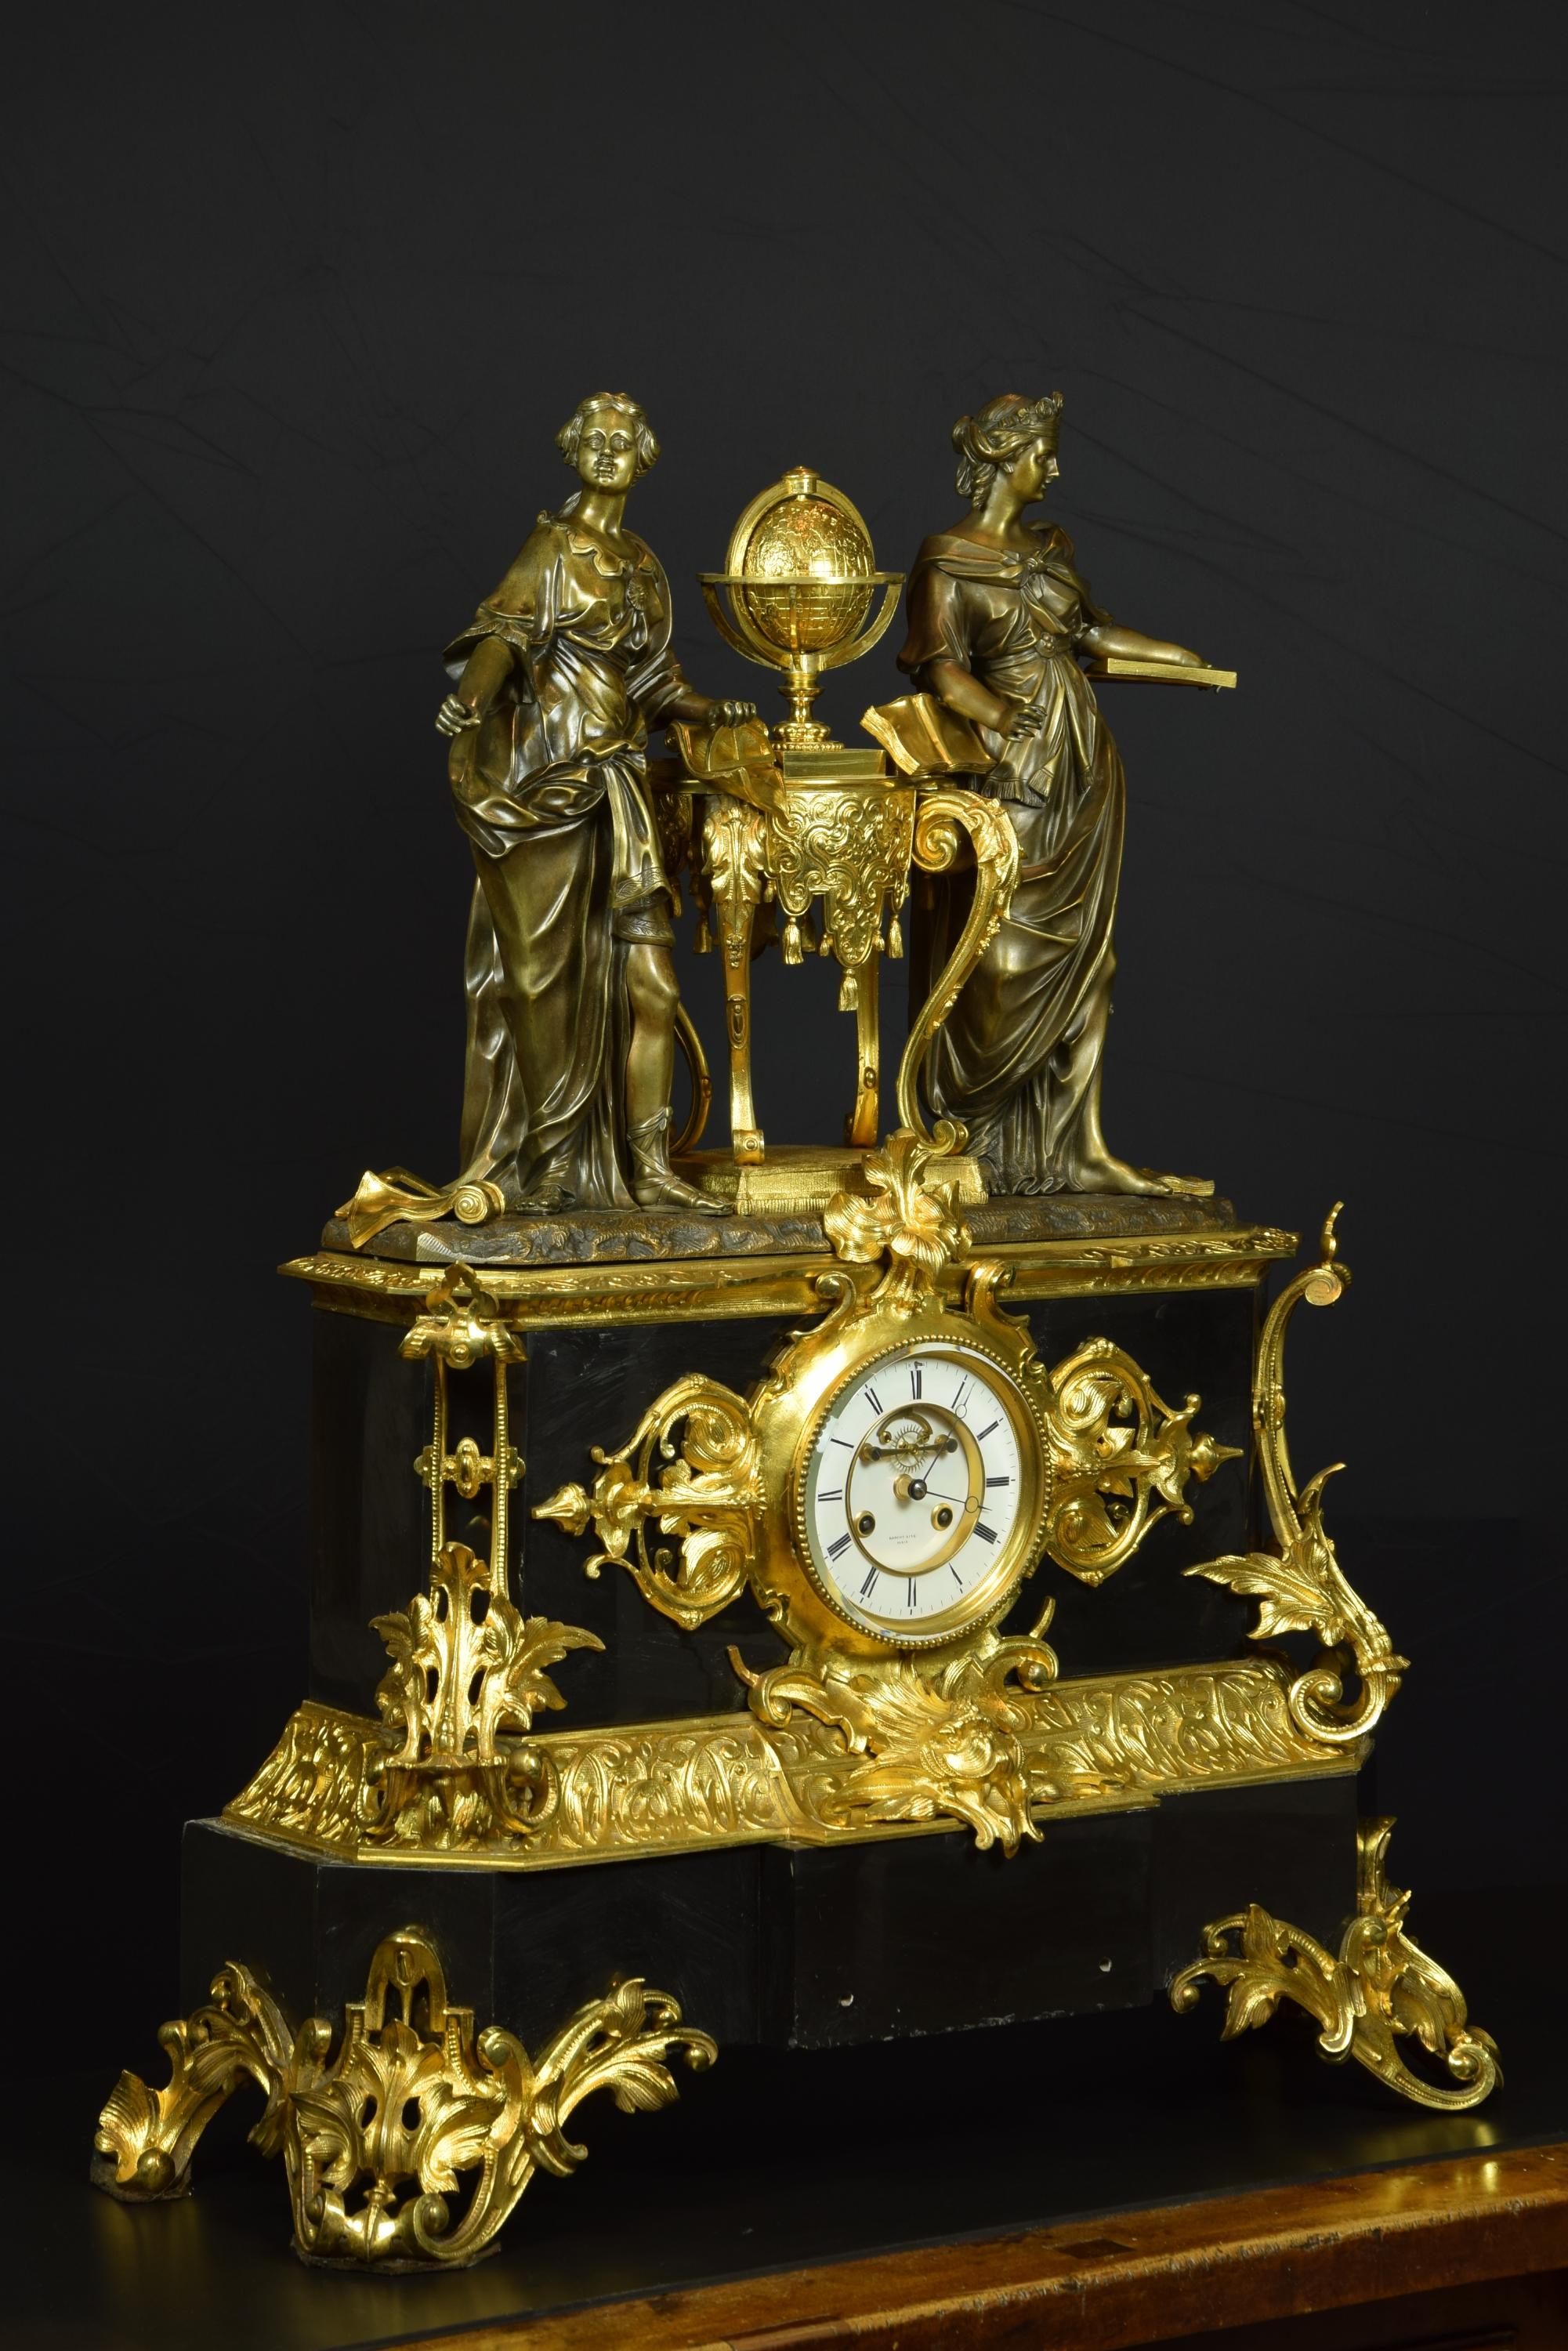 French table clock with allegory of sciences, 19th century. Belgian marble and gilded bronze.
The white dial with numeration in Romans presents breguet needles and part of the movement in sight. It is housed inside a protective glass, decorated with